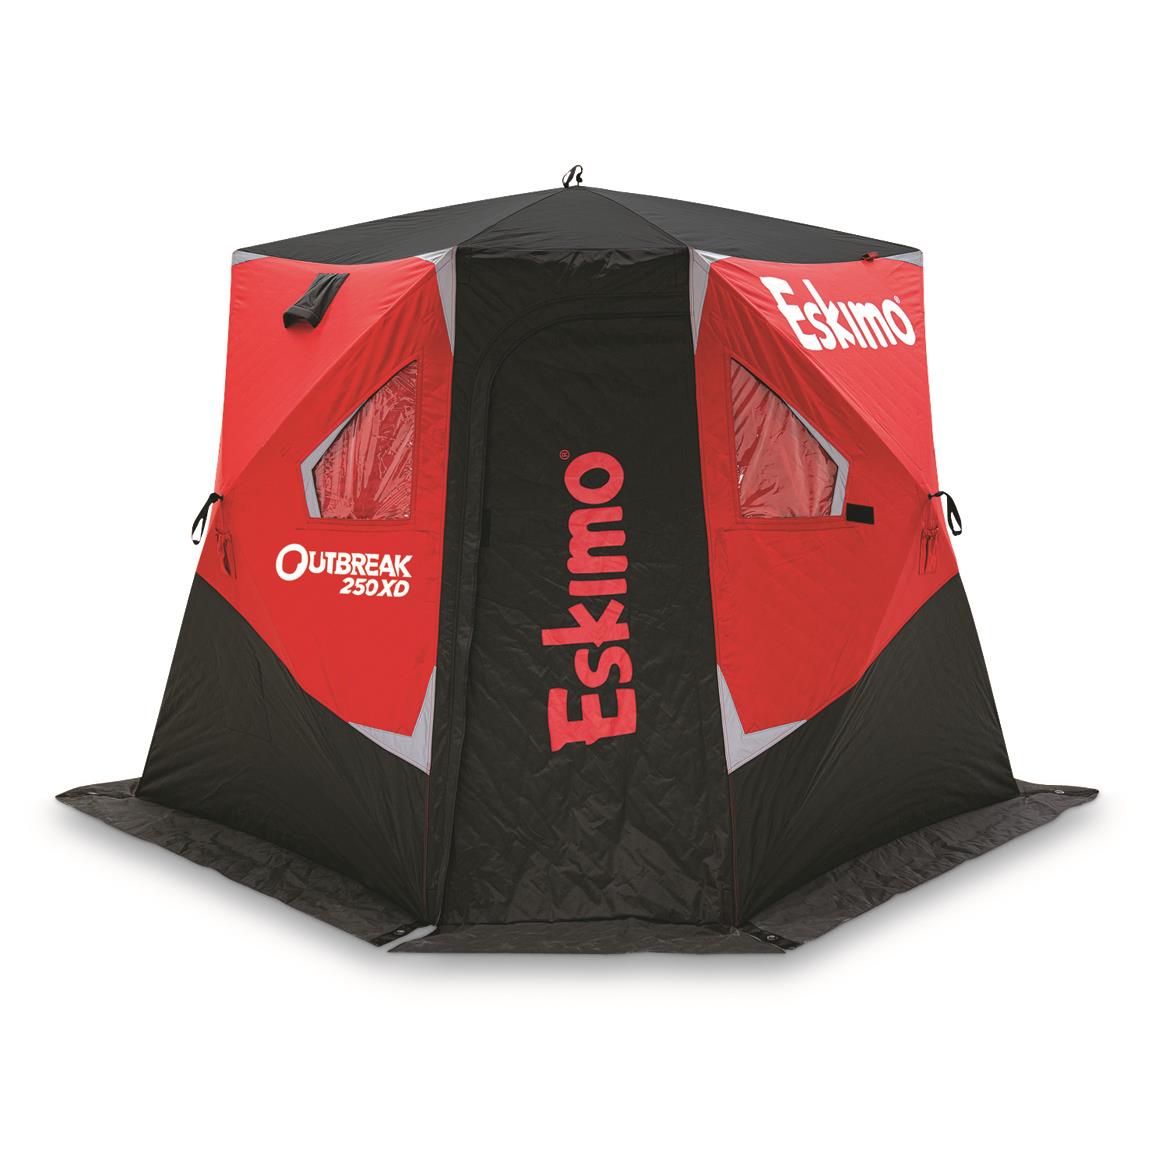 Eskimo Outbreak 250XD Insulated Hub-Style Ice Fishing Shelter, 3-Person